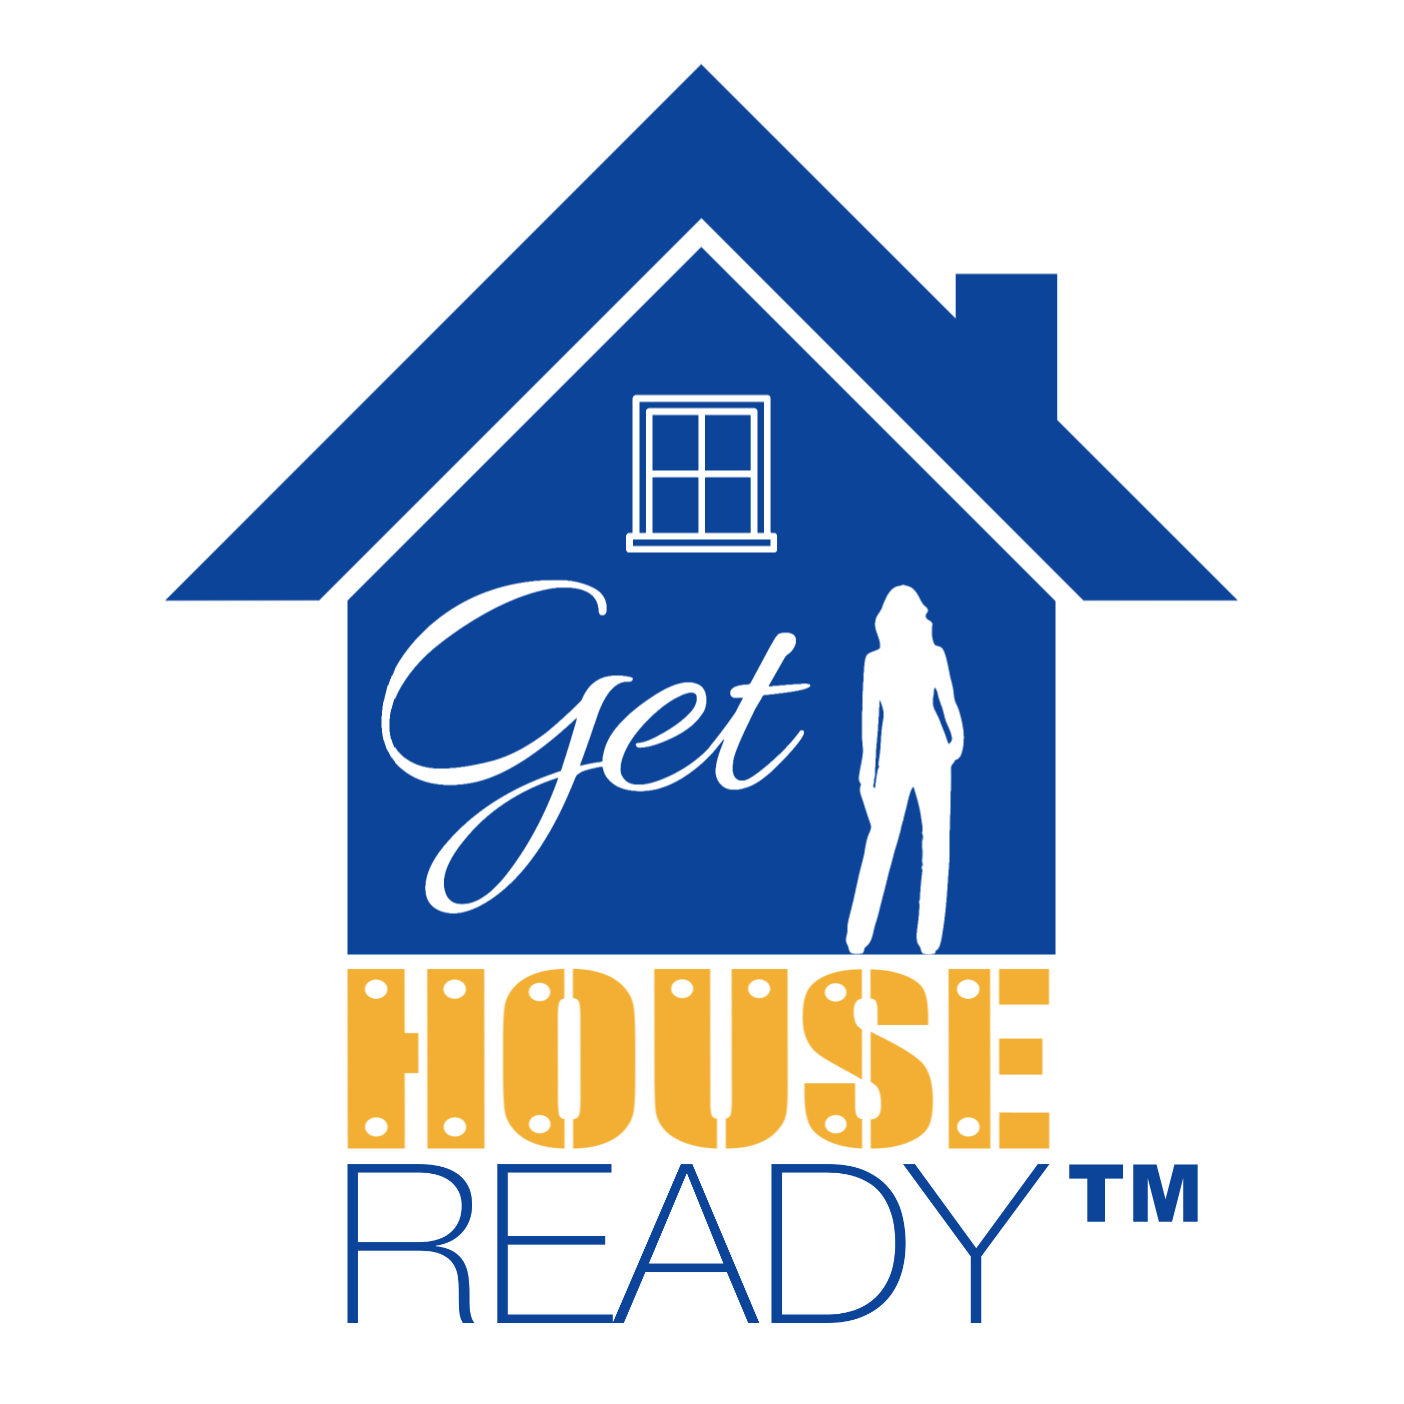 Get House Ready LOGO.png